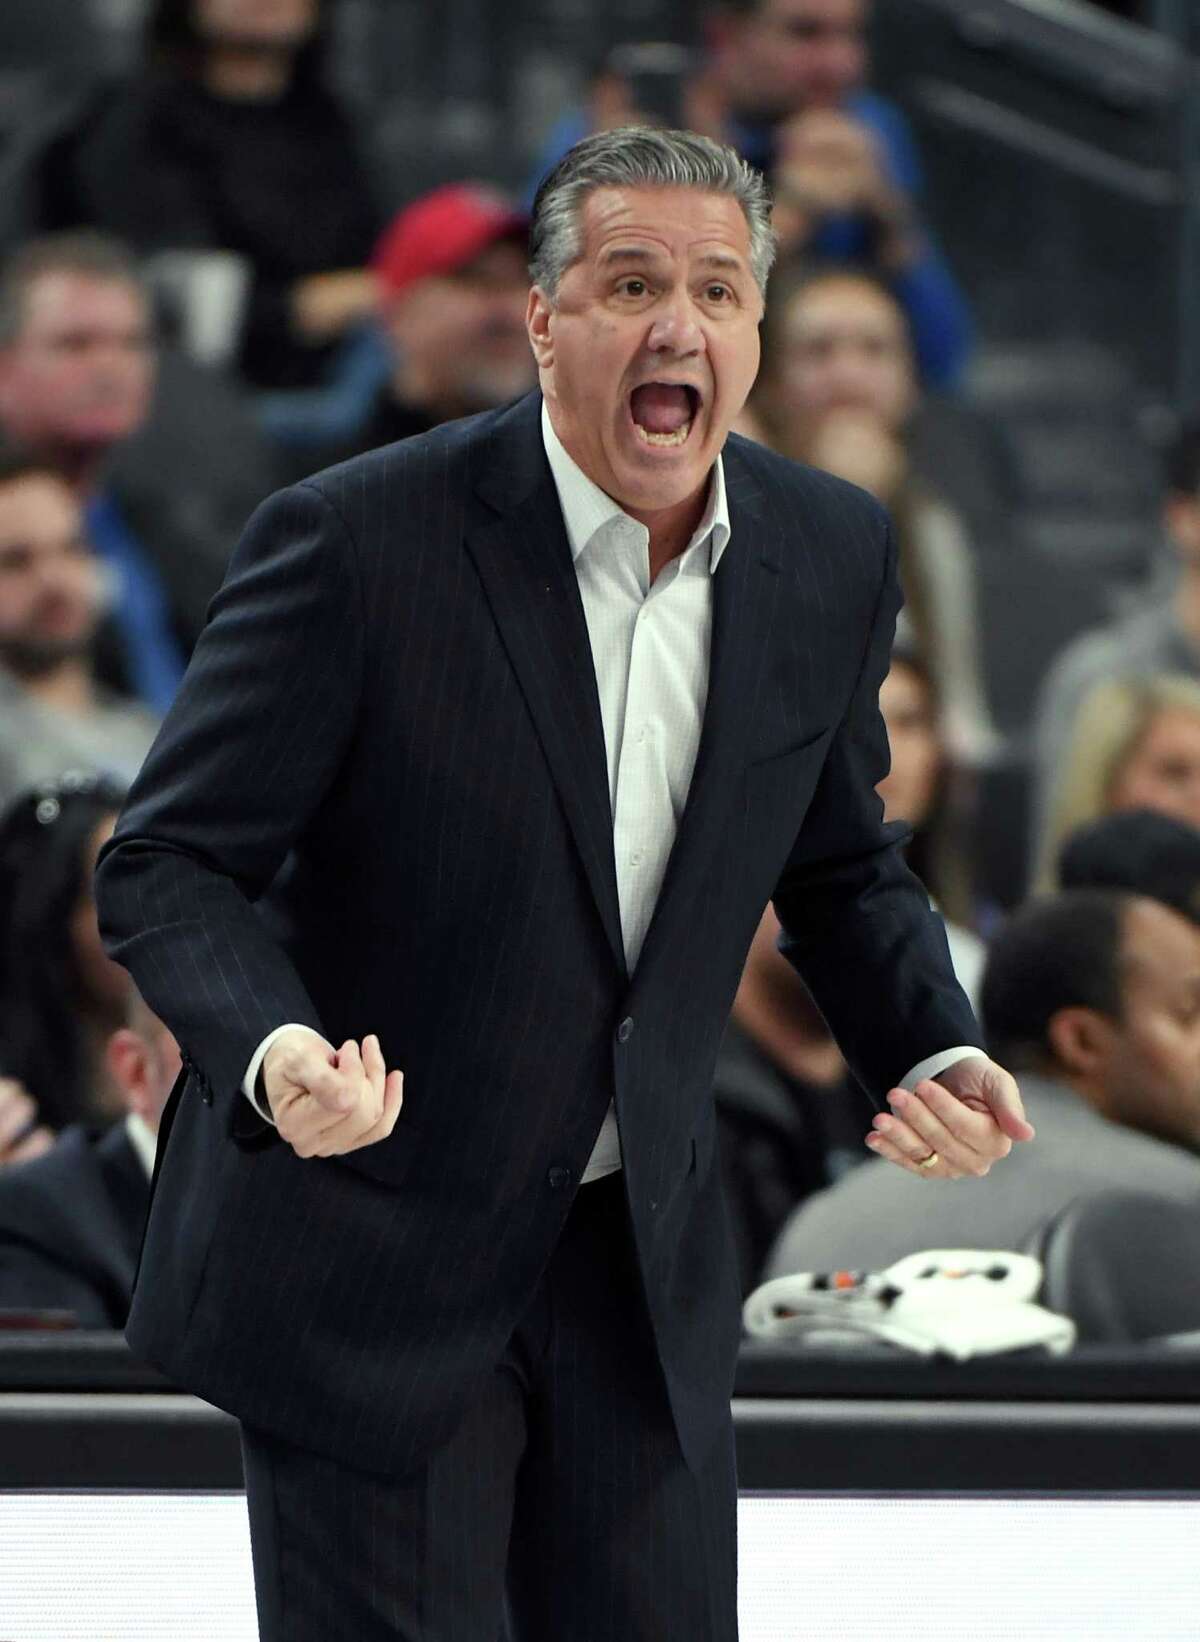 LAS VEGAS, NEVADA - DECEMBER 21: Head coach John Calipari of the Kentucky Wildcats reacts during his team's game against the Ohio State Buckeyes during the CBS Sports Classic at T-Mobile Arena on December 21, 2019 in Las Vegas, Nevada. The Buckeyes defeated the Wildcats 71-65. (Photo by Ethan Miller/Getty Images)